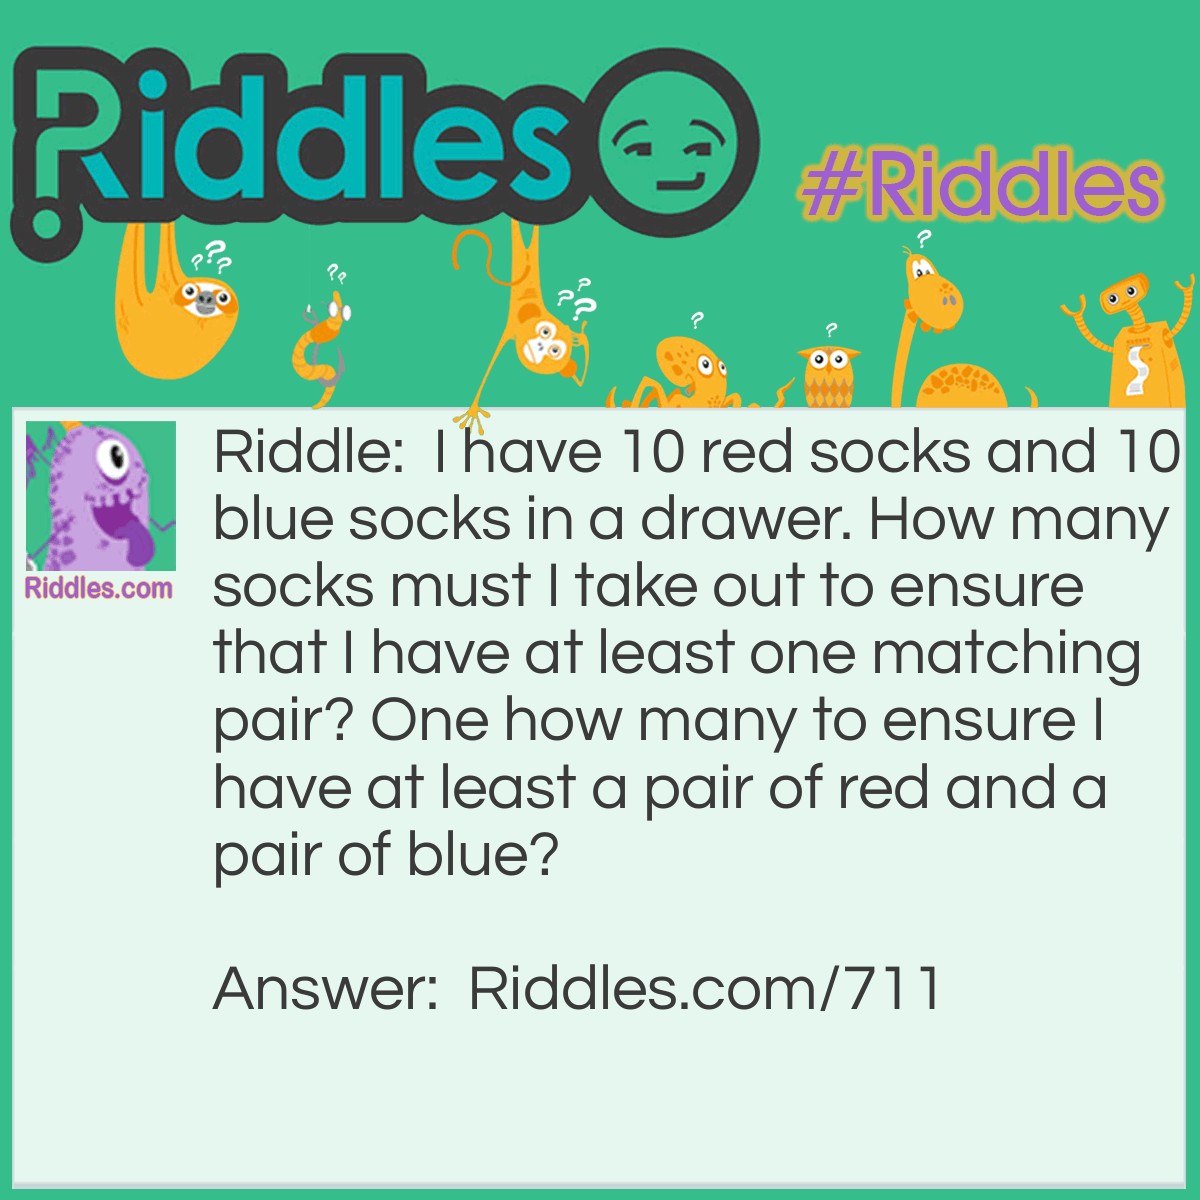 Riddle: I have 10 red socks and 10 blue socks in a drawer. How many socks must I take out to ensure that I have at least one matching pair? One how many to ensure I have at least a pair of red and a pair of blue? Answer: Three for one pair, and twelve to ensure one pair of each color.